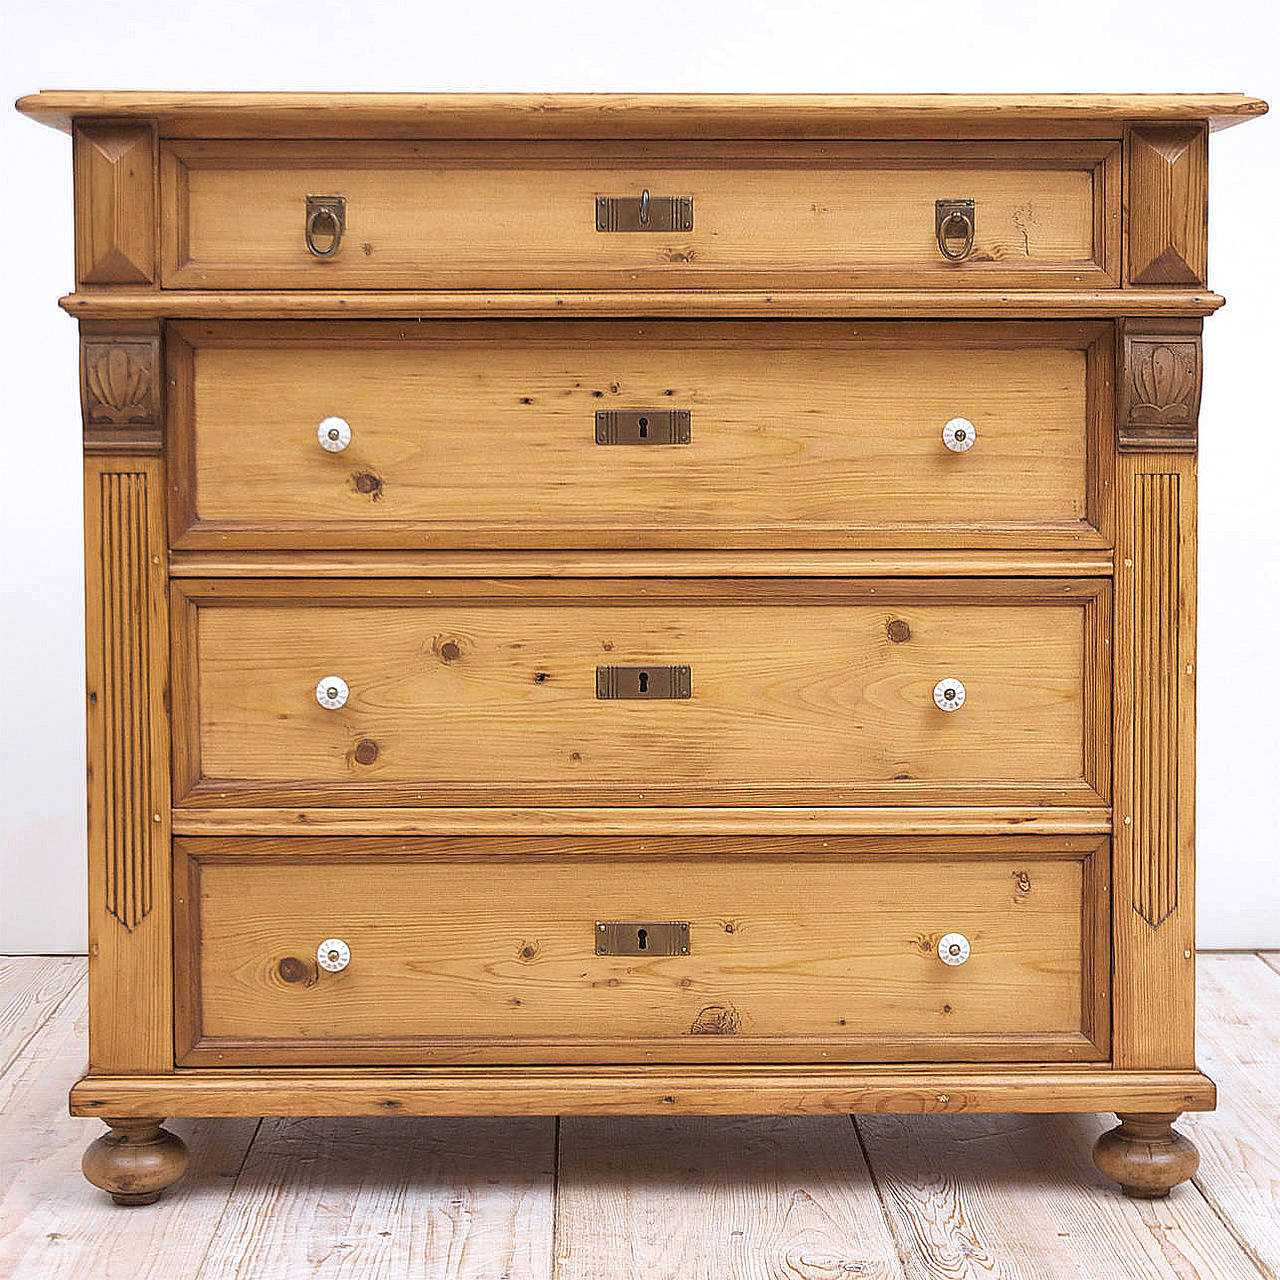 The finest period European pine from the Art Nouveau epoch, a chest
with four drawers of graduated depths offering original brass key plates and rings, working locks with one key and resting on original turned, bun feet. While antique, porcelain